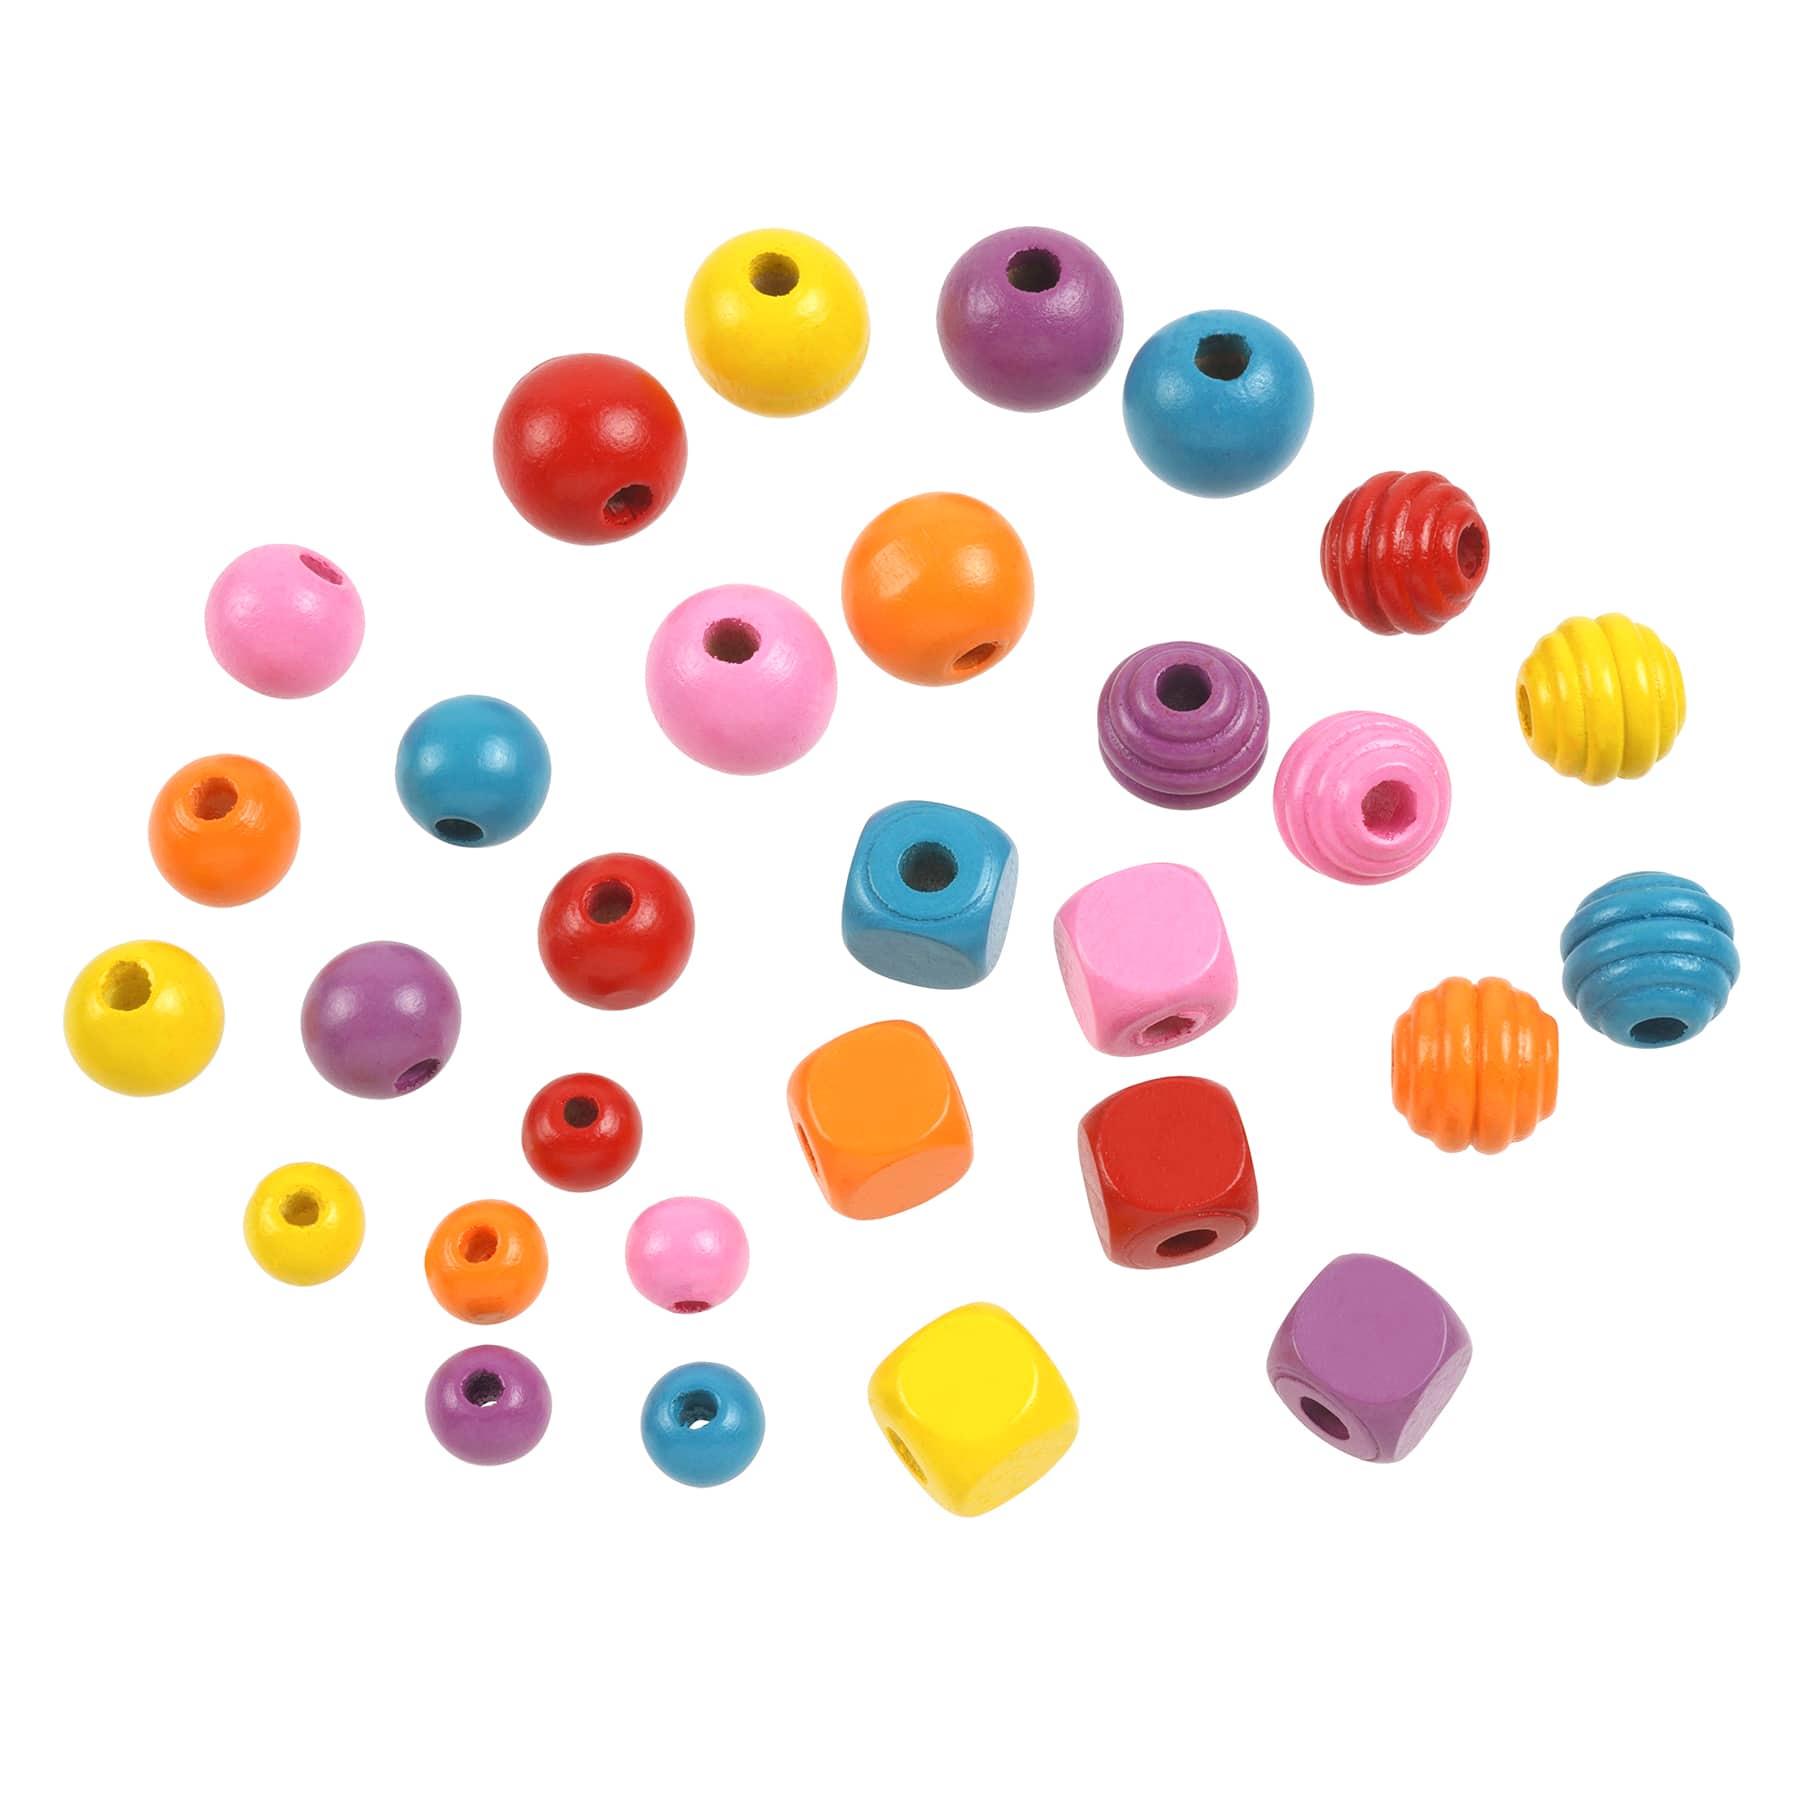 1lb. Multicolor Shaped Wood Beads by Creatology&#x2122;